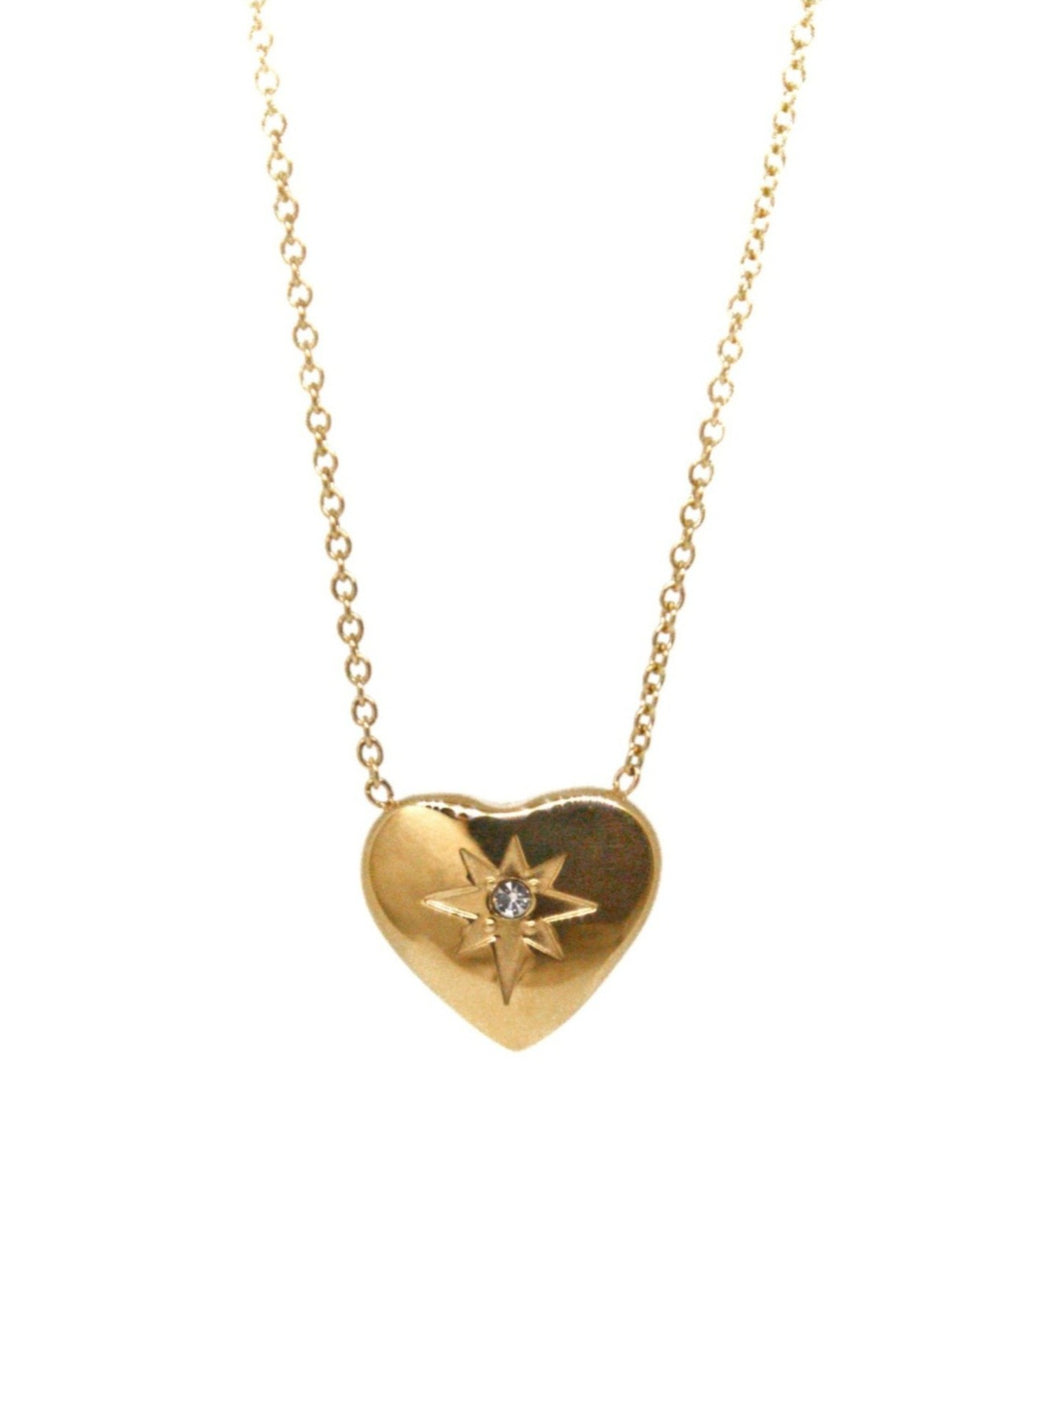 gold plated heart-shaped pendant necklace with cubic zirconia stone in the middle